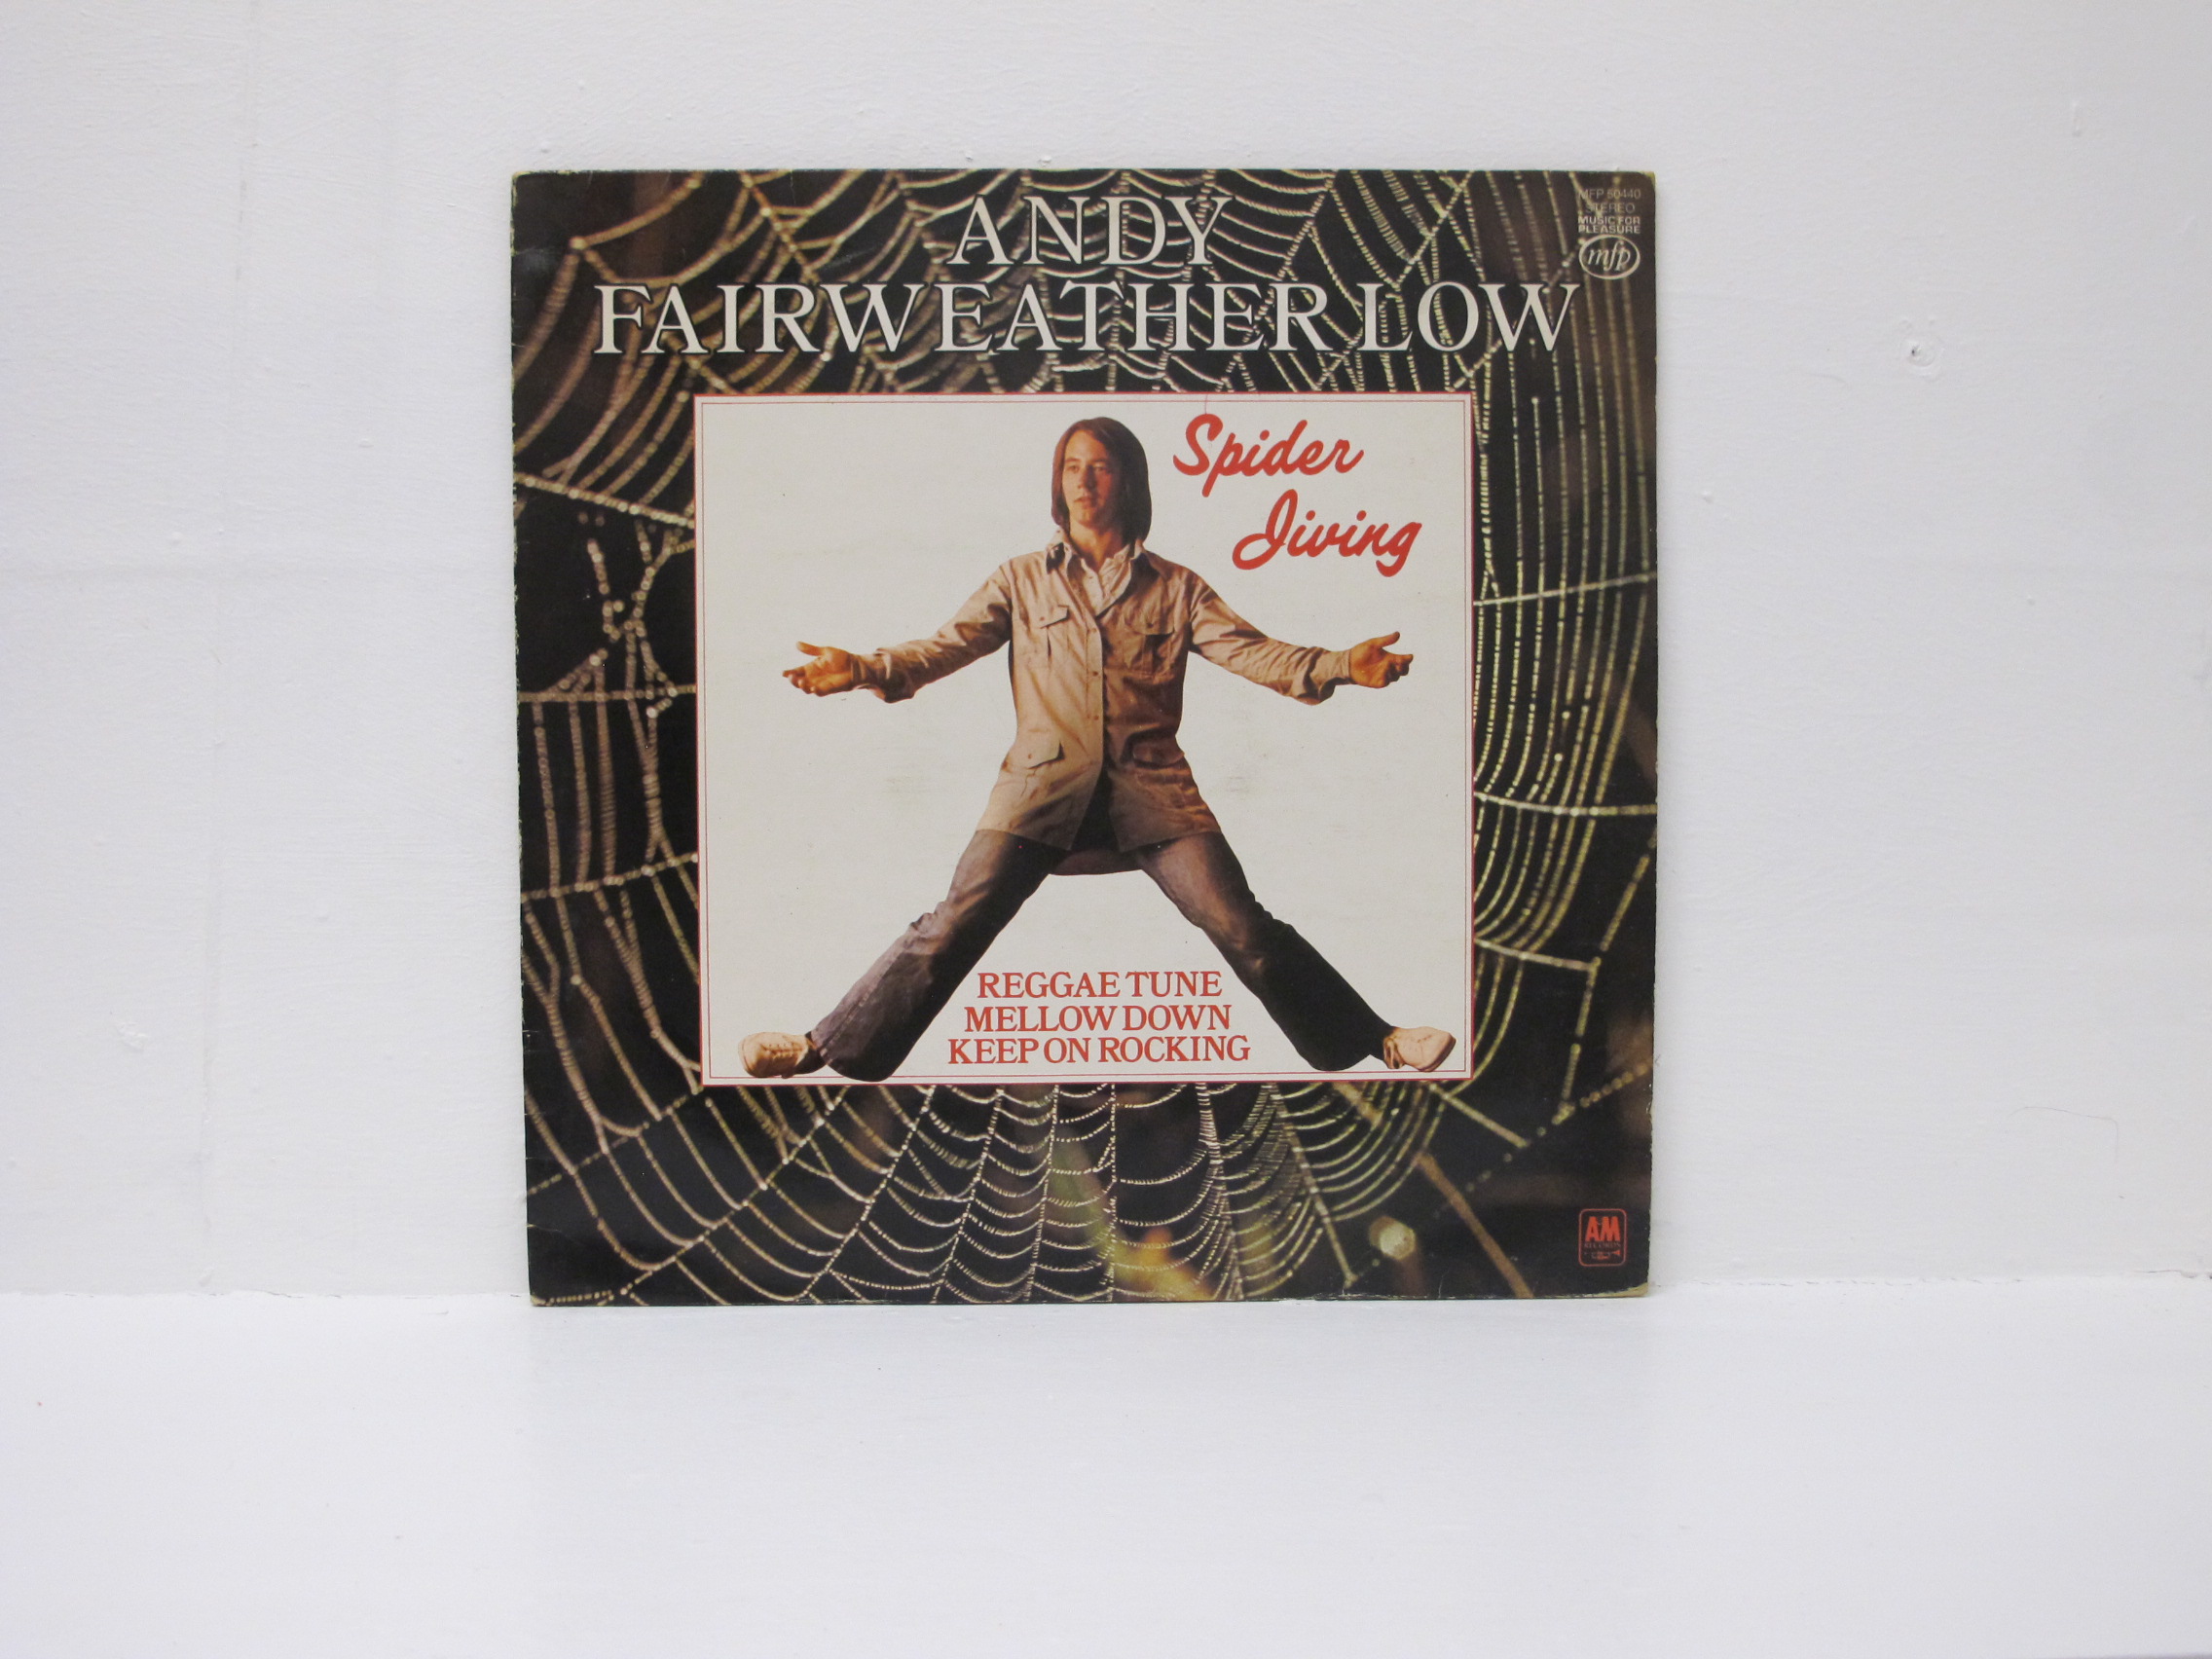 Andy Fairweather Low - Spider Jiving